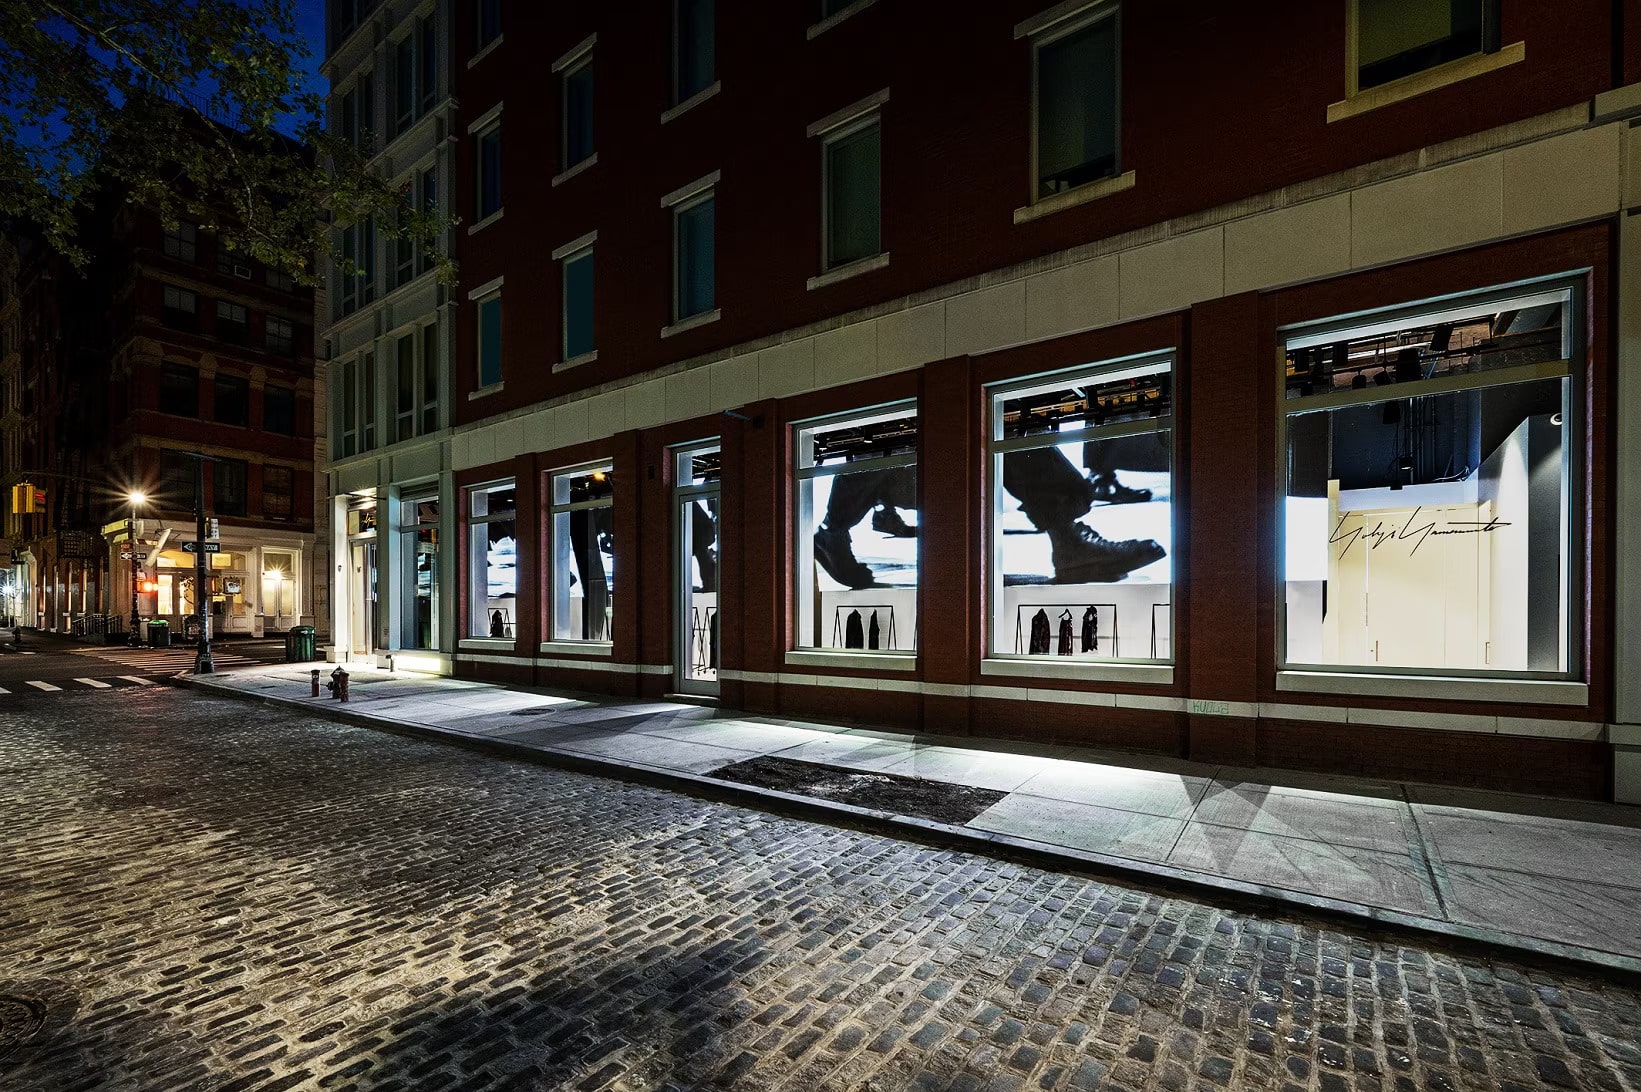 New York, NY, USA - Aug 16, 2022: The Louis Vuitton store at